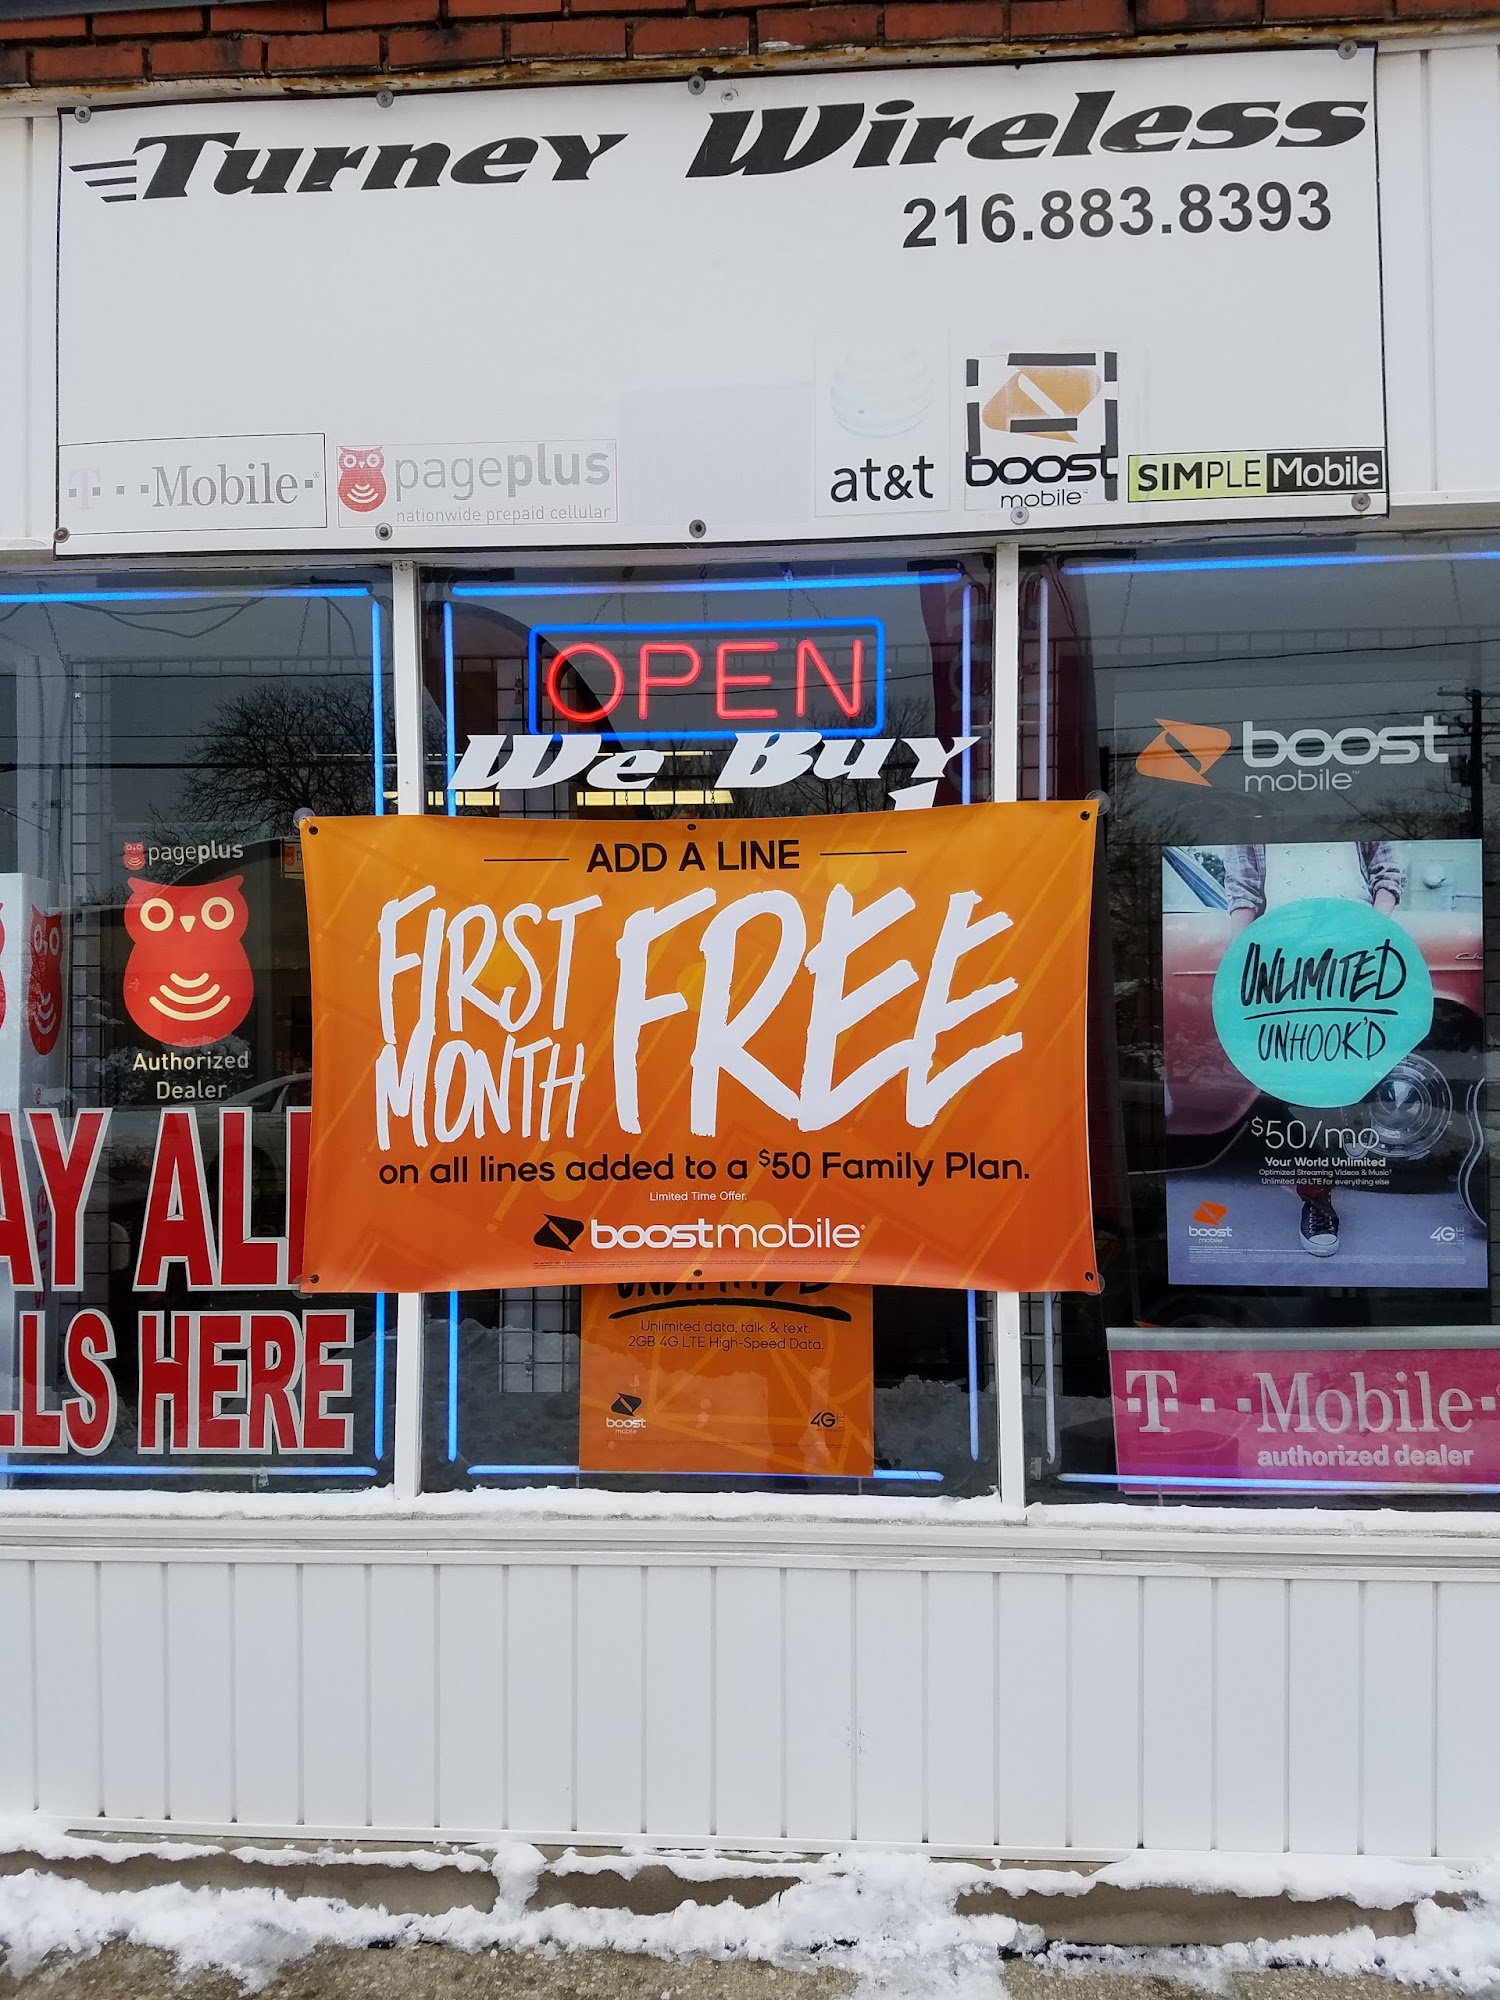 Boost mobile By Turney Wireless